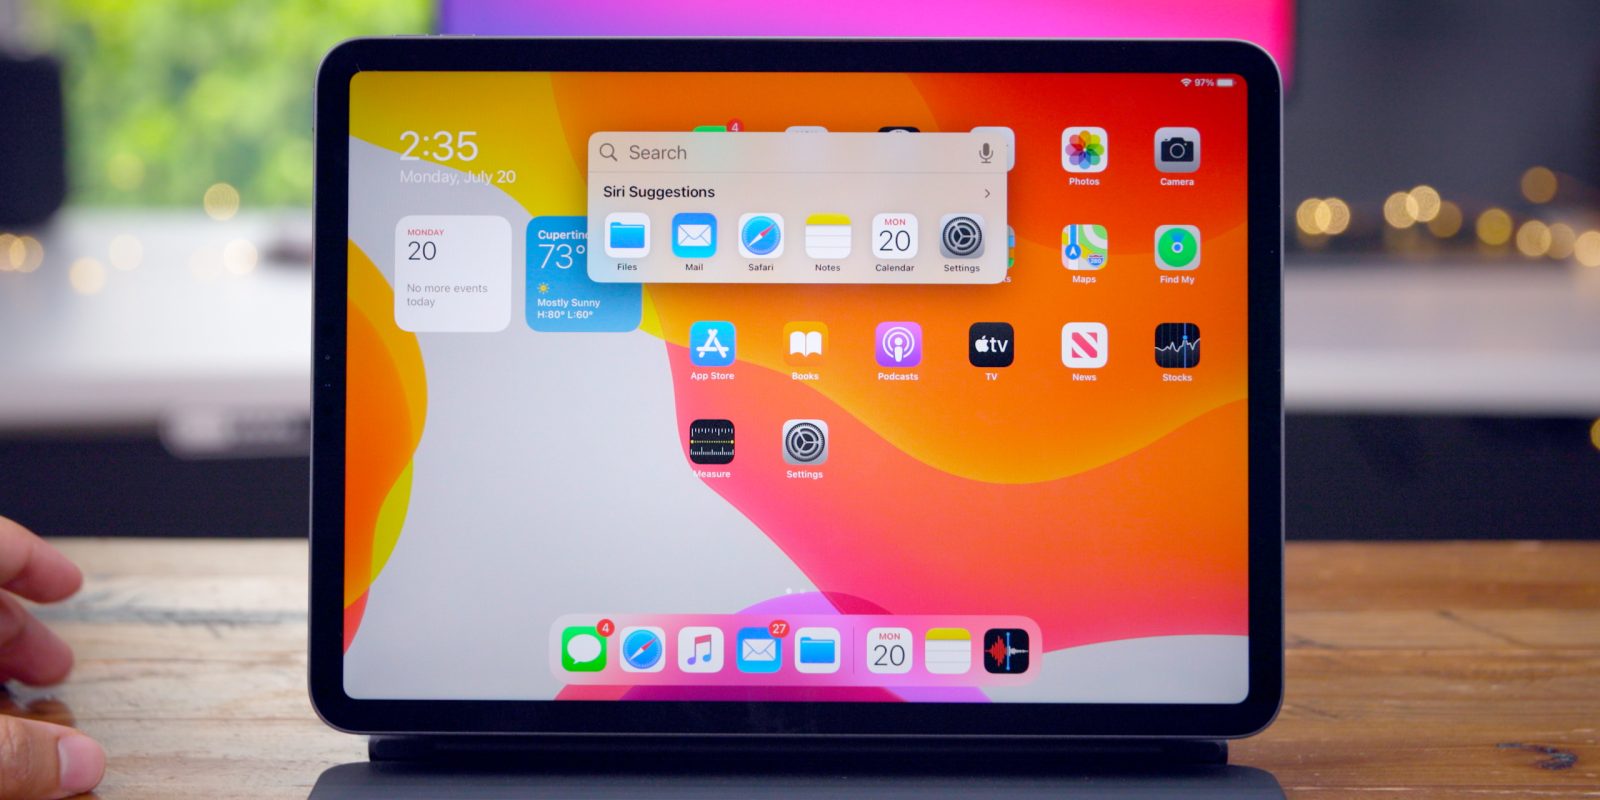 iPadOS 14: Features, Release Date, Compatible Devices, etc - 9to5Mac